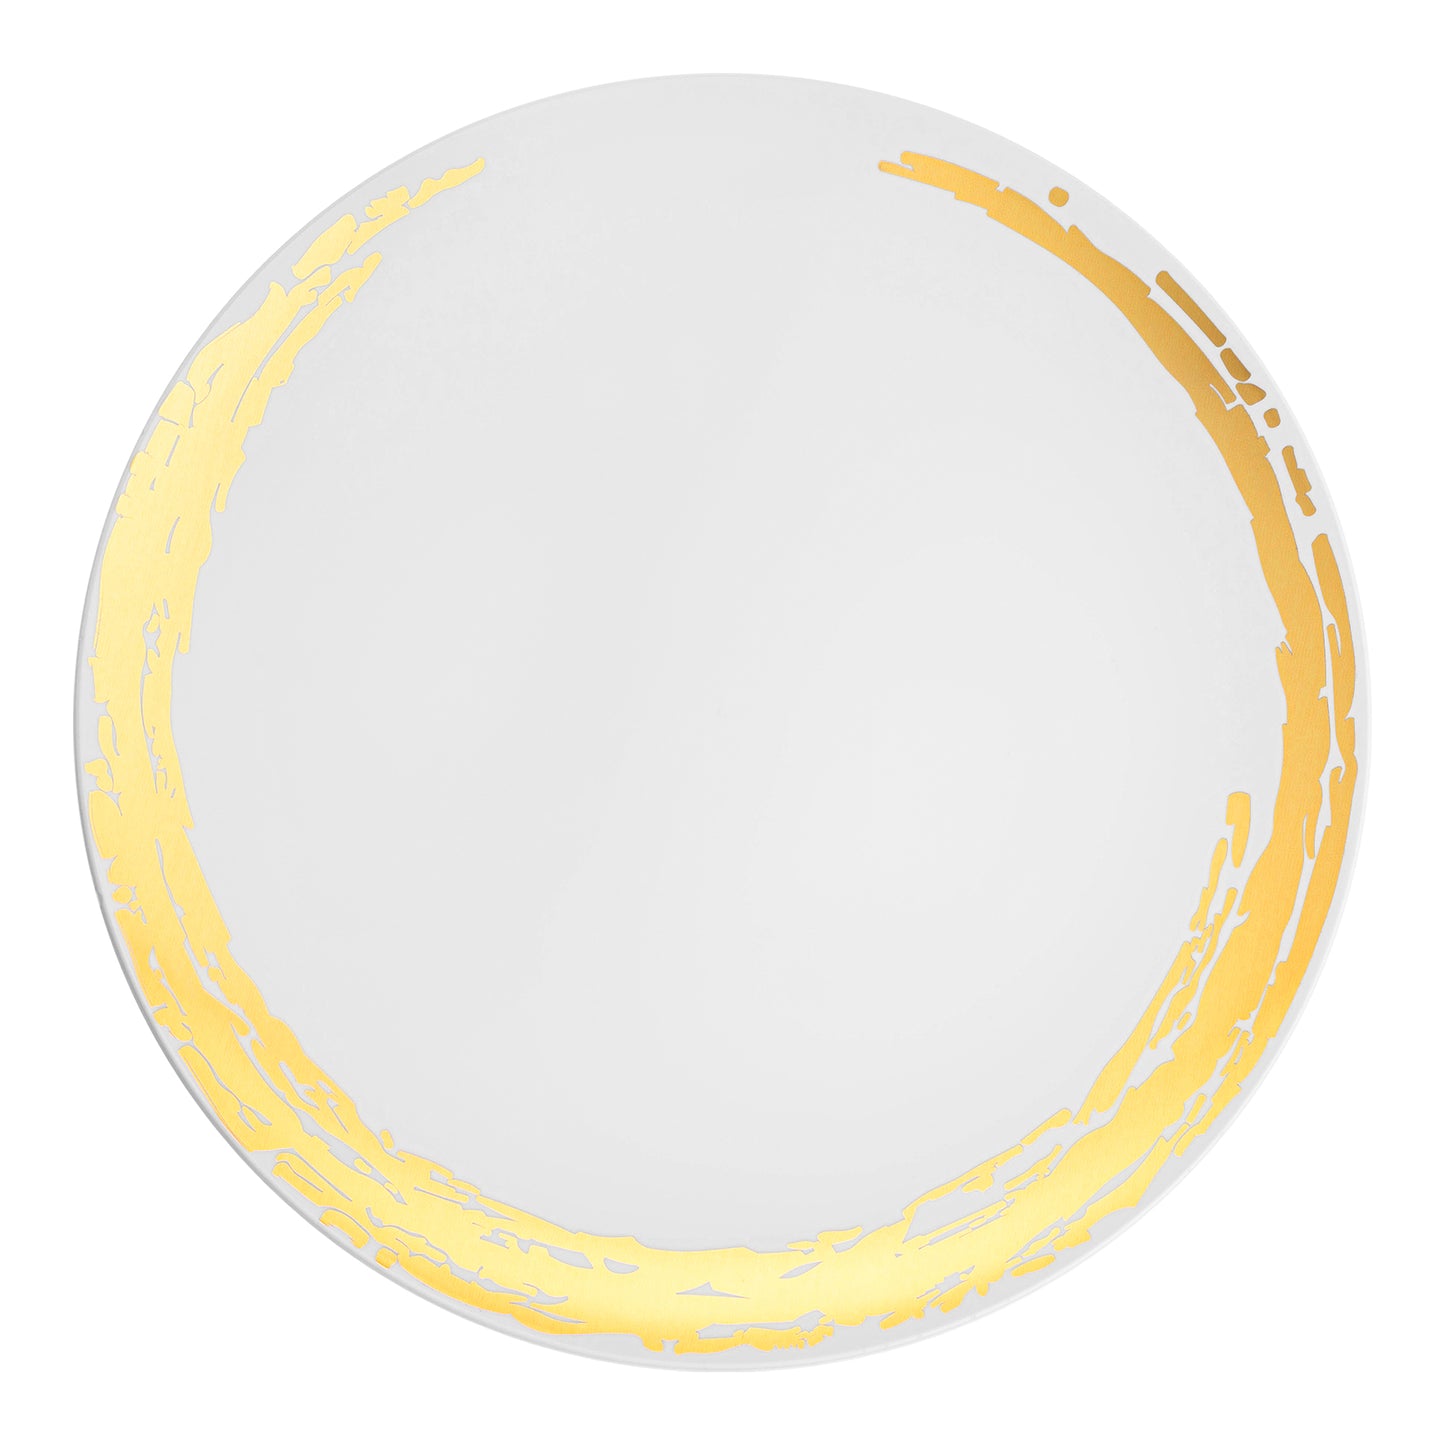 White with Gold Moonlight Round Disposable Plastic Appetizer/Salad Plates (7.5") | The Kaya Collection